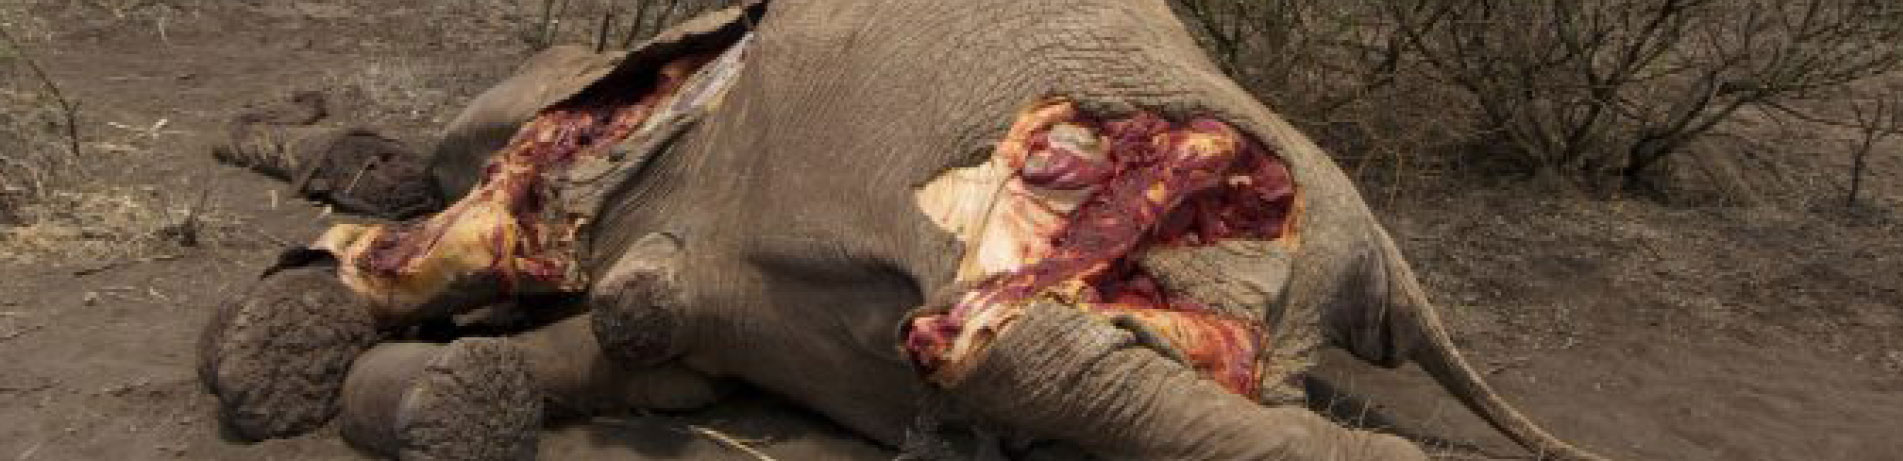 Body of Hope, an elephant poached in Kenya